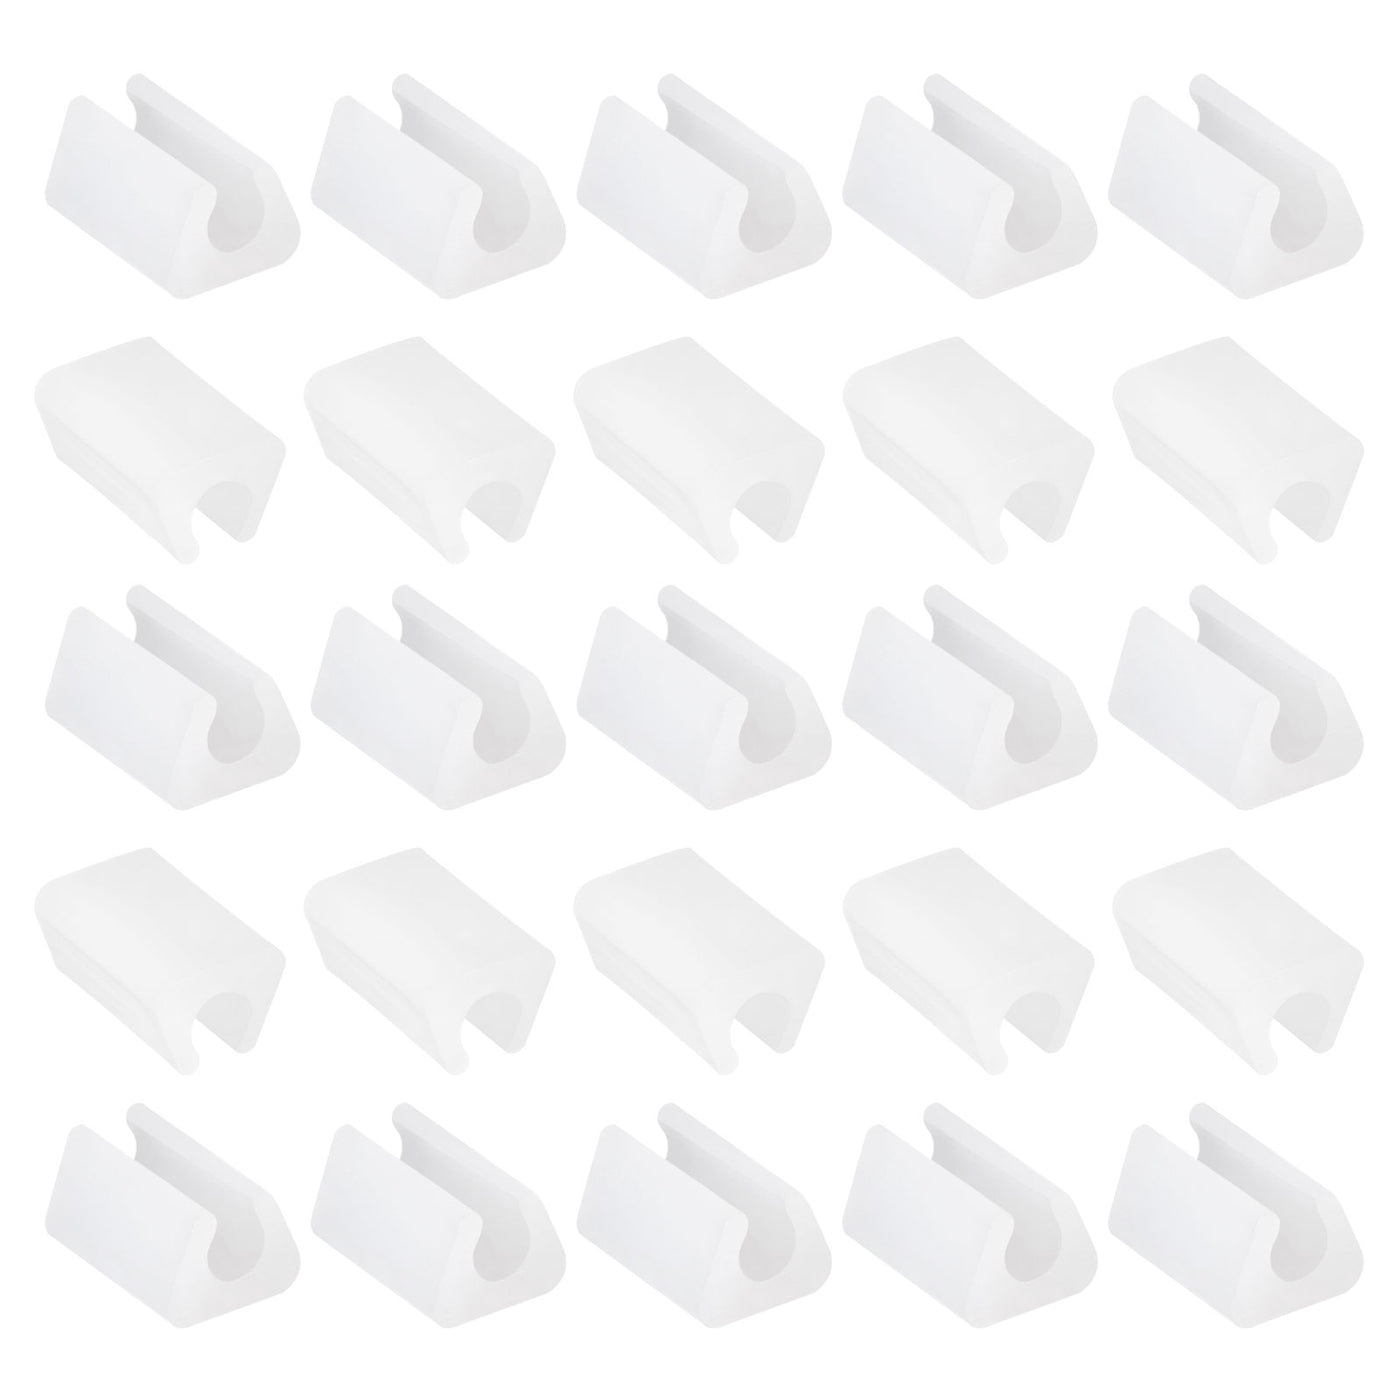 uxcell Uxcell 25Pcs Rectangle Shaped Non-Slip Chair Leg Tip 6-7mm Plastic Furniture Feet White